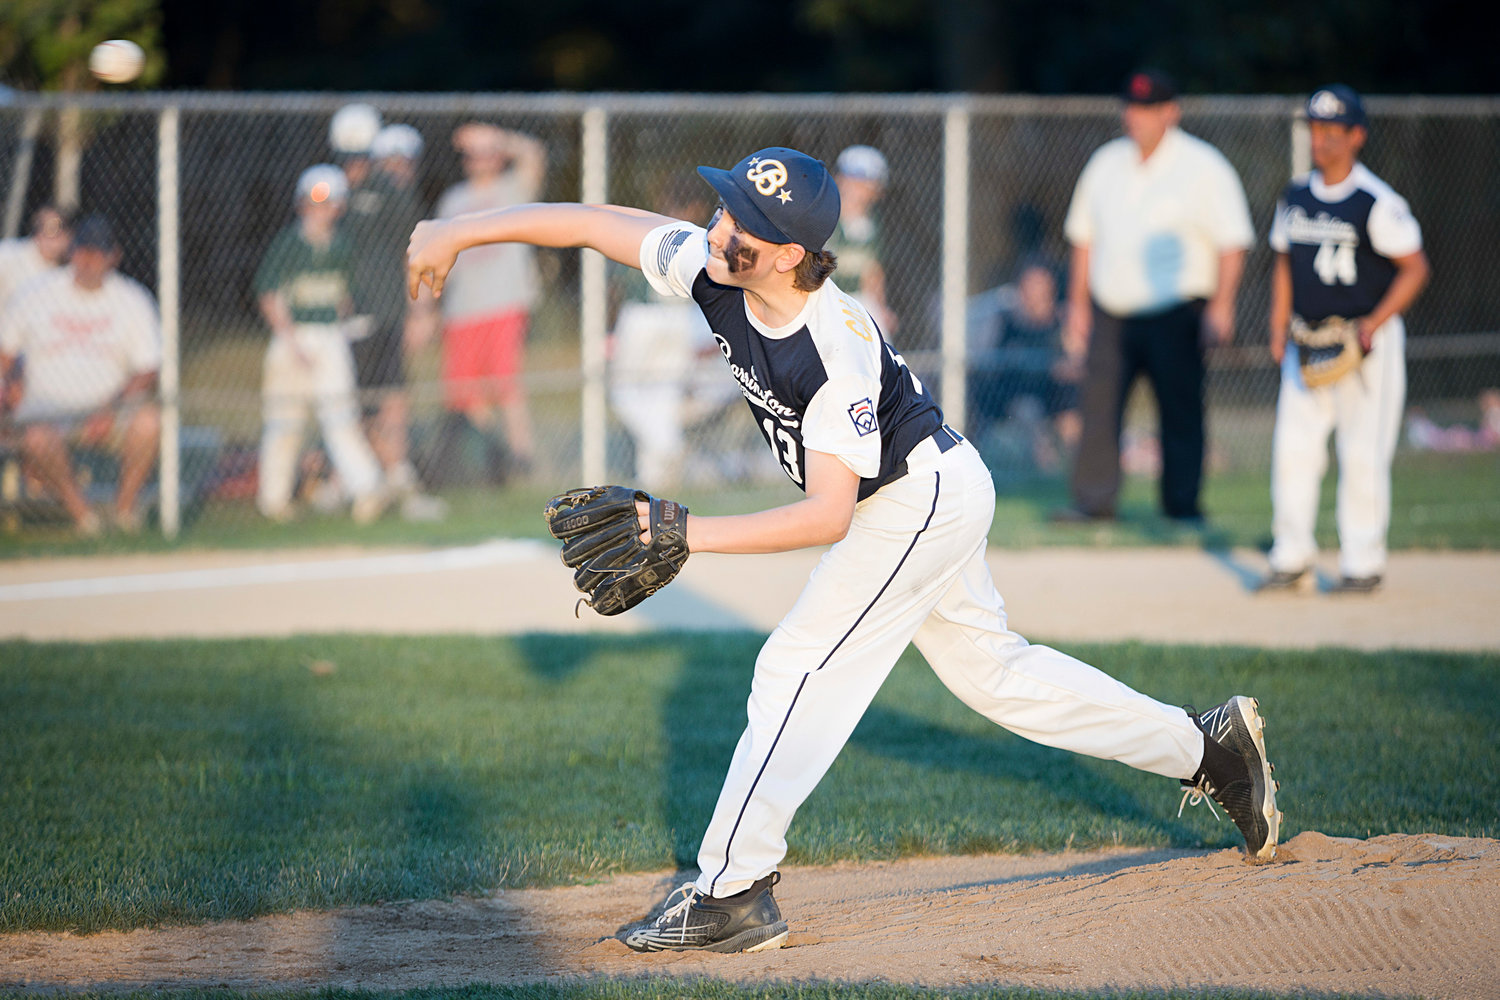 Sean Calderella fires a pitch to a Cranston East batter while competing in the 11U All-Star State Tournament, Wednesday.